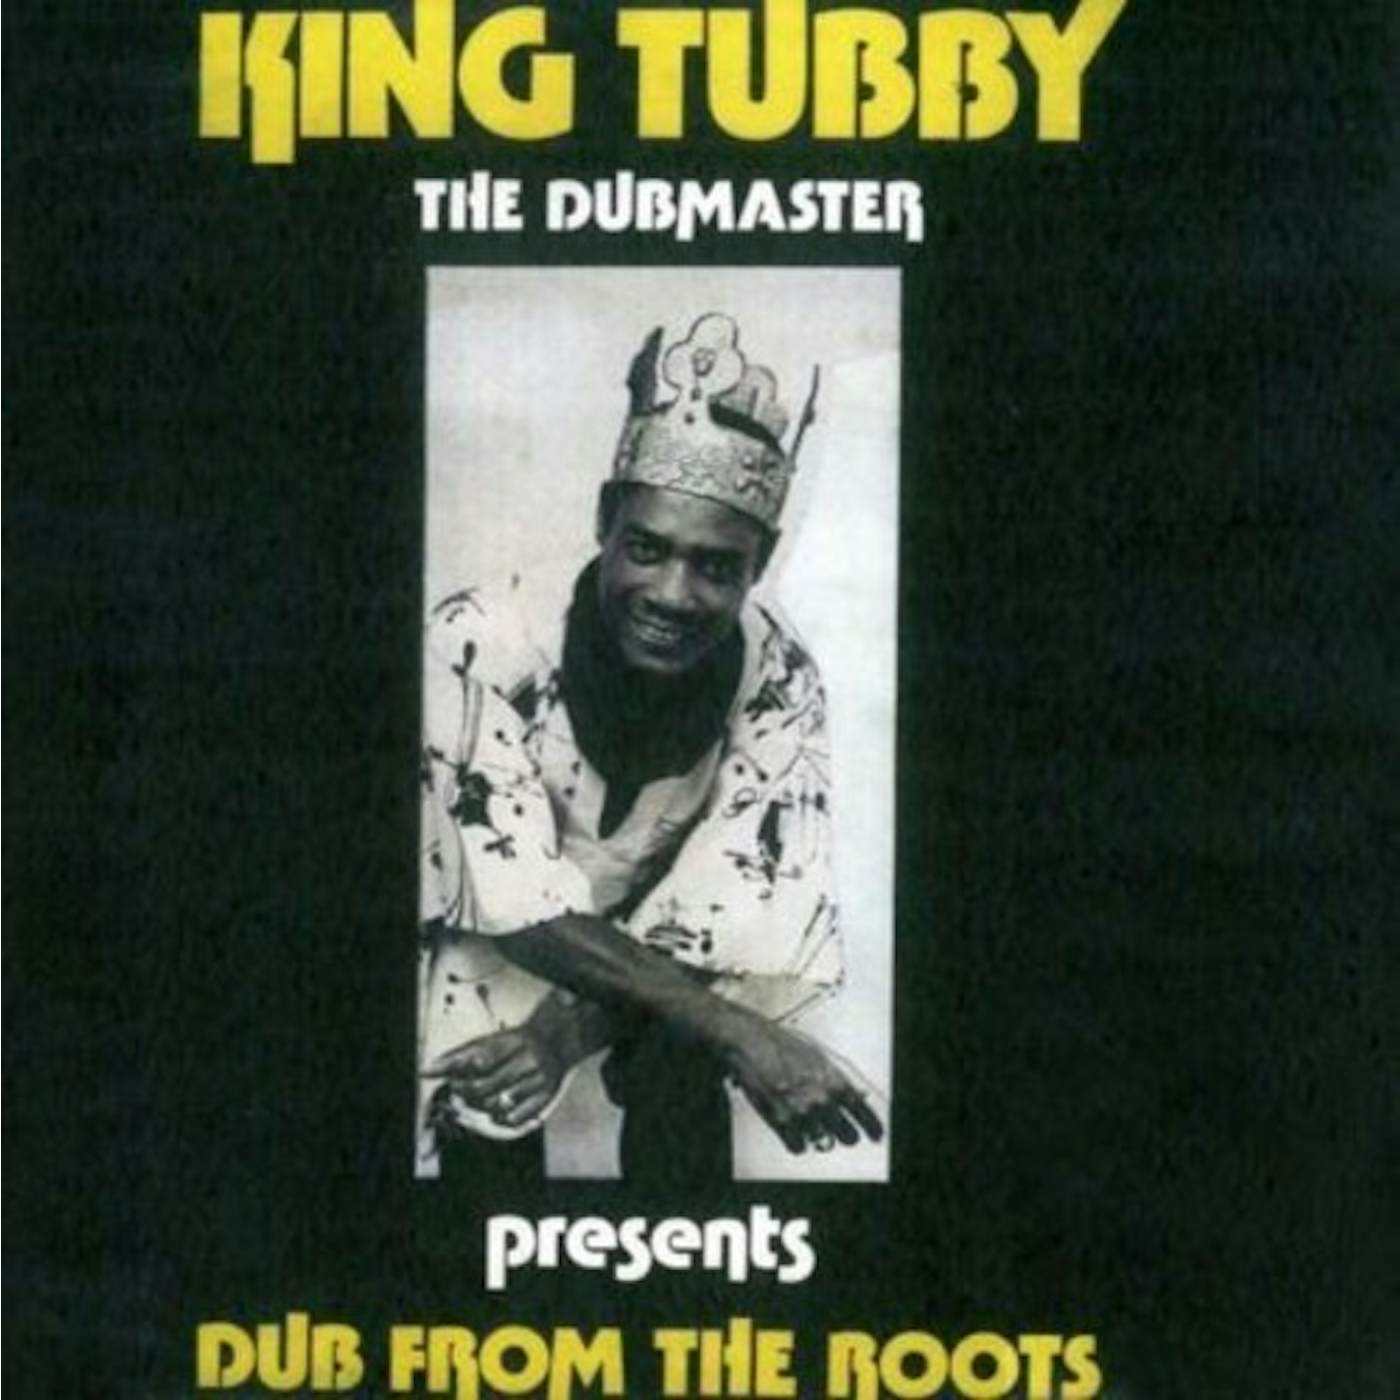 King Tubby DUB FROM THE ROOTS Vinyl Record